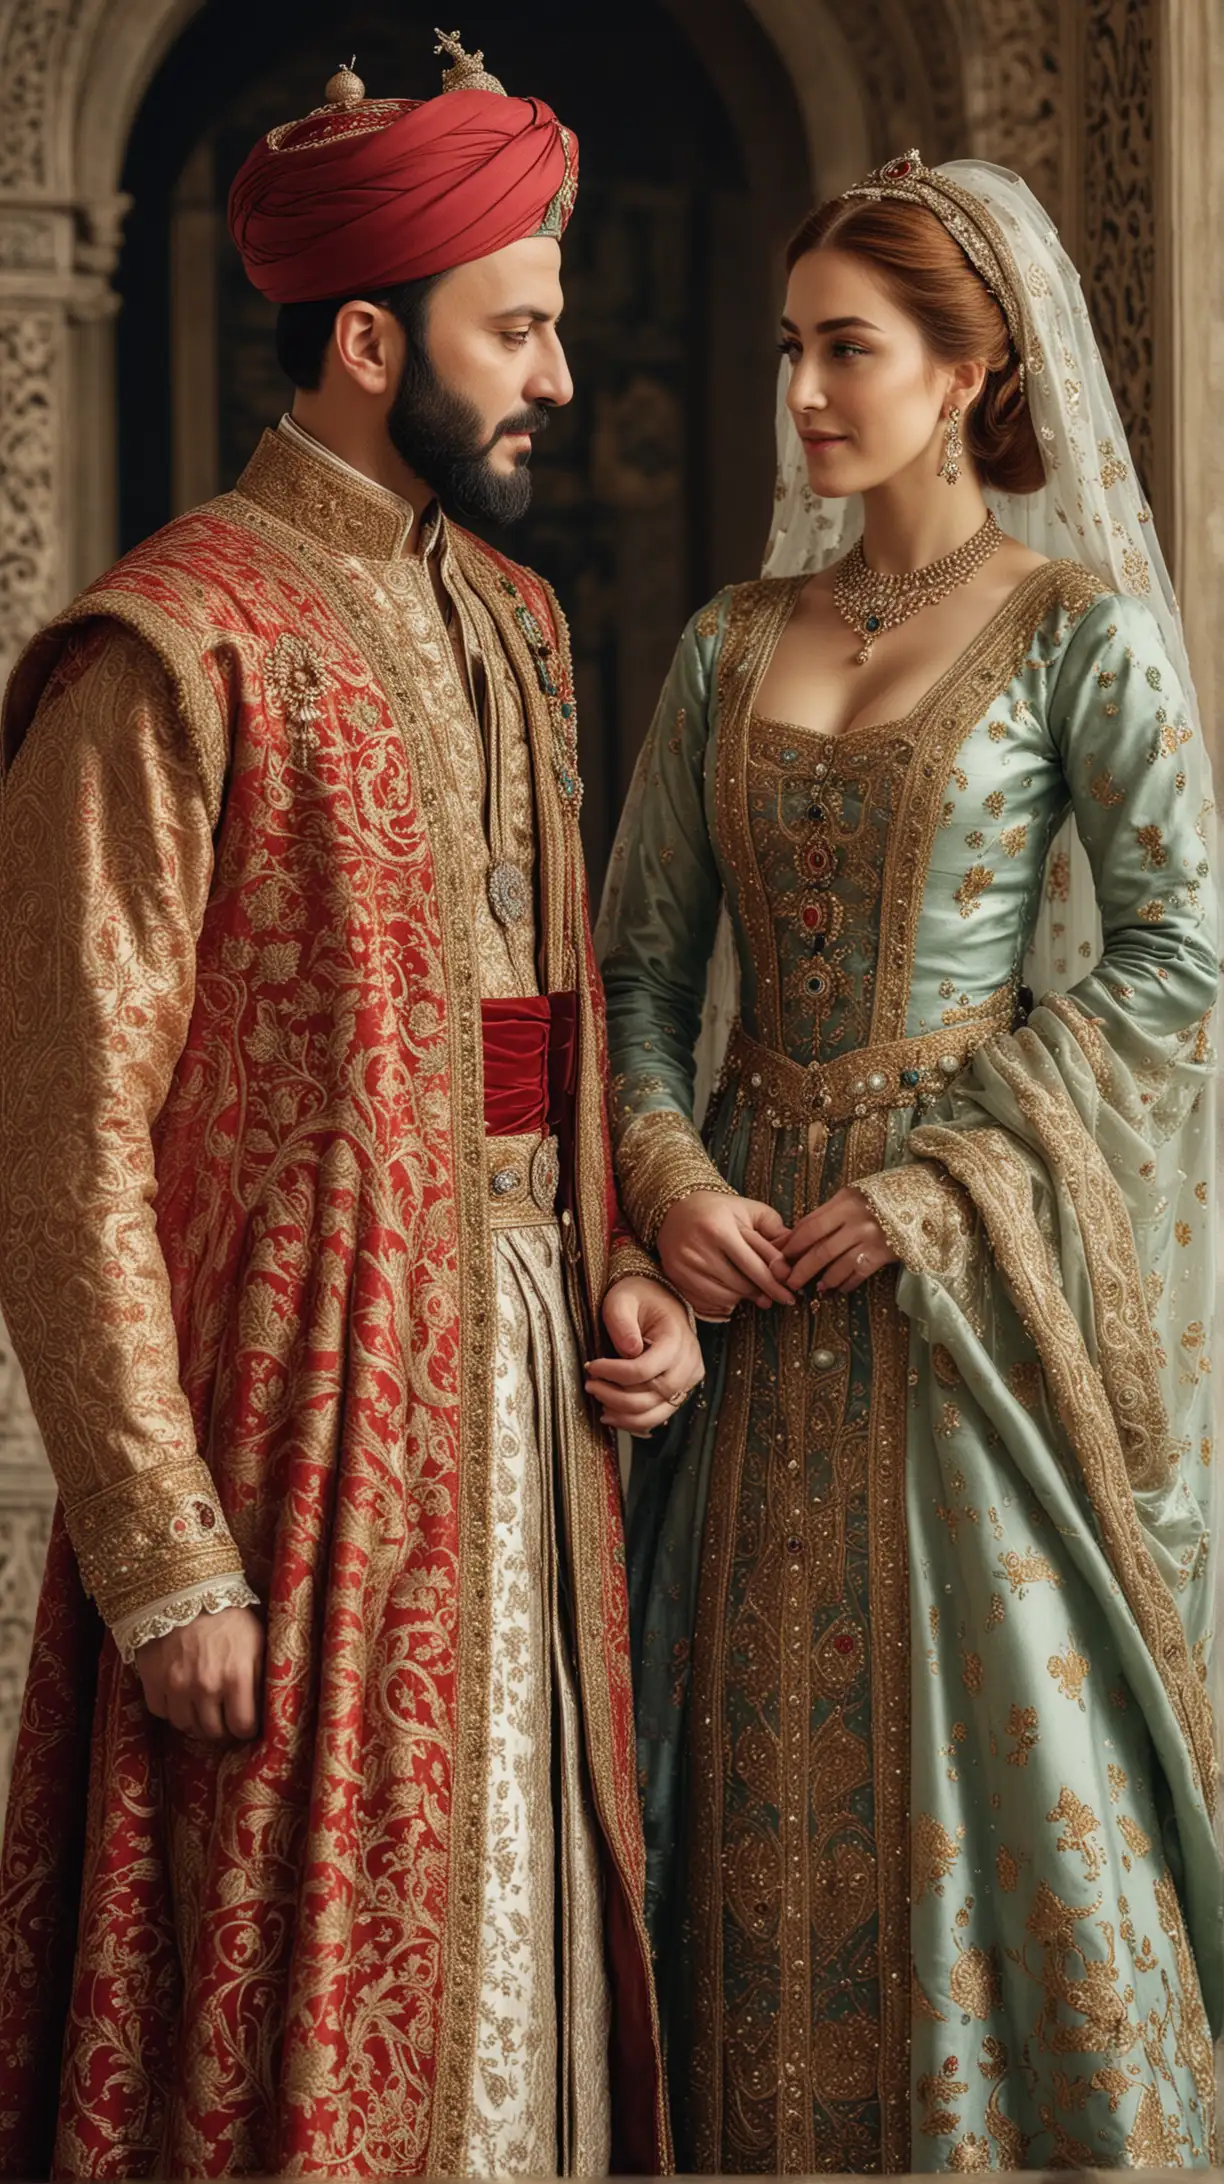 An elegant portrait of Suleiman and Hurrem standing side by side, dressed in their royal attire, with expressions of affection and mutual respect.